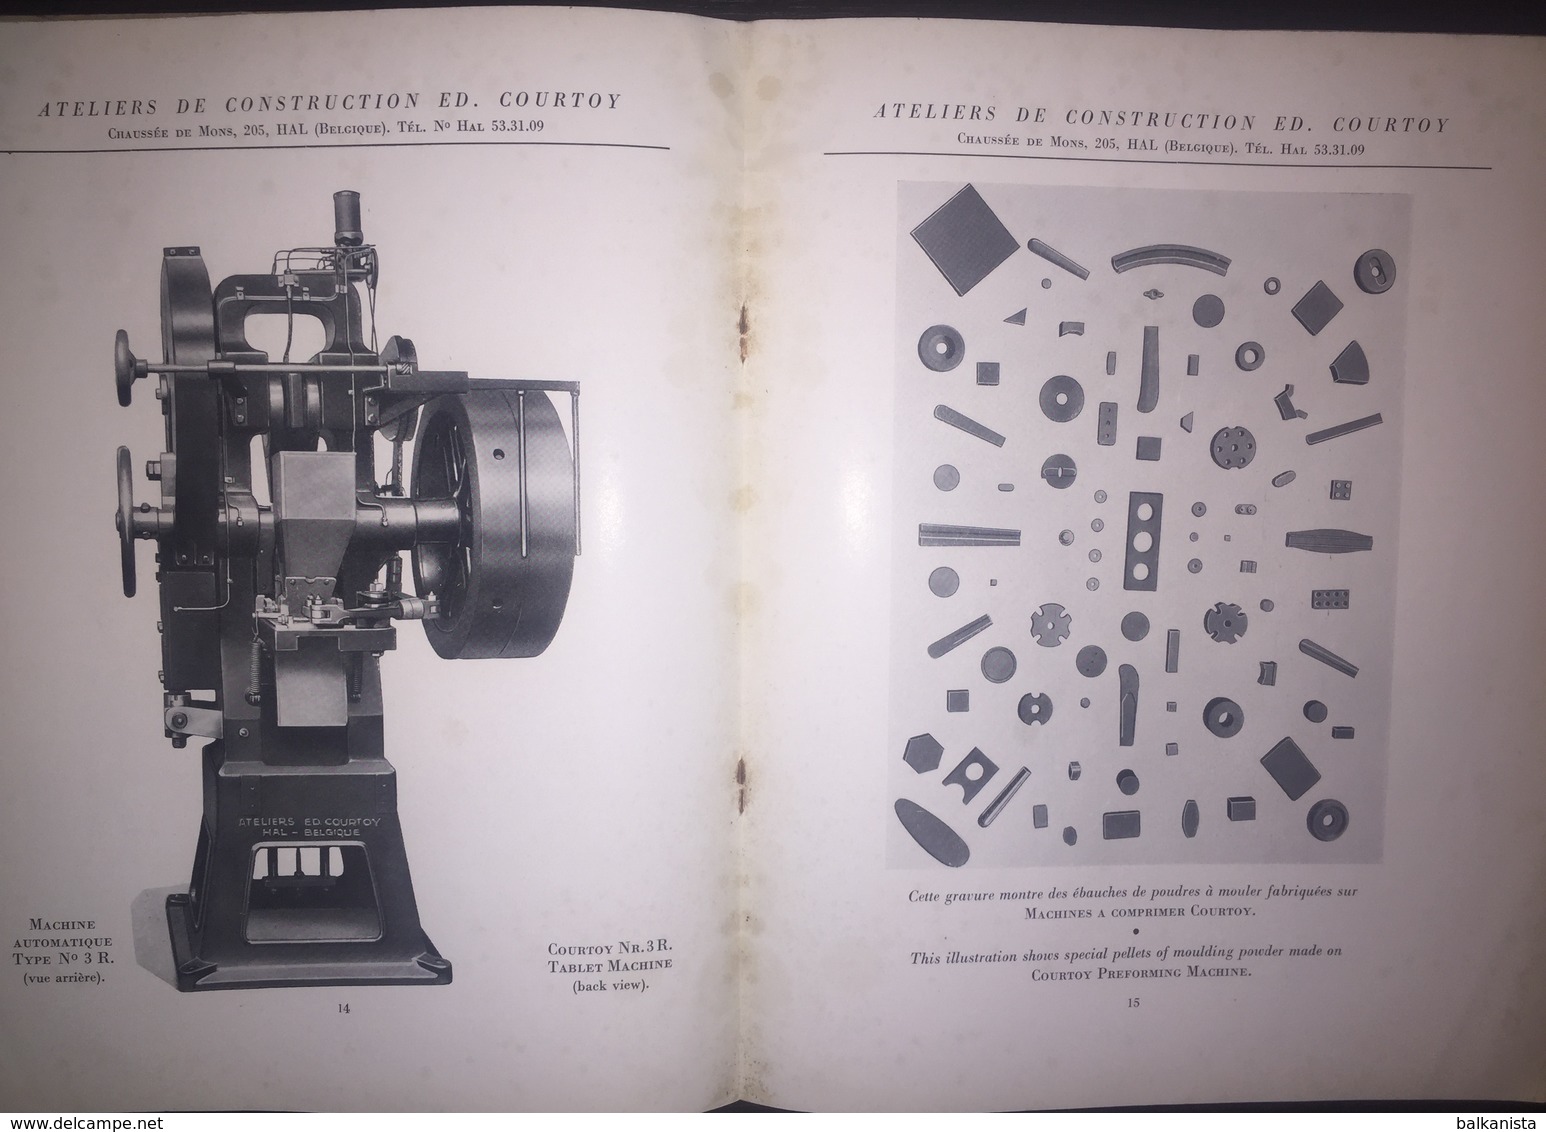 Machines A Comprimier Courtoy . Tablet Machines Catalog - Tools